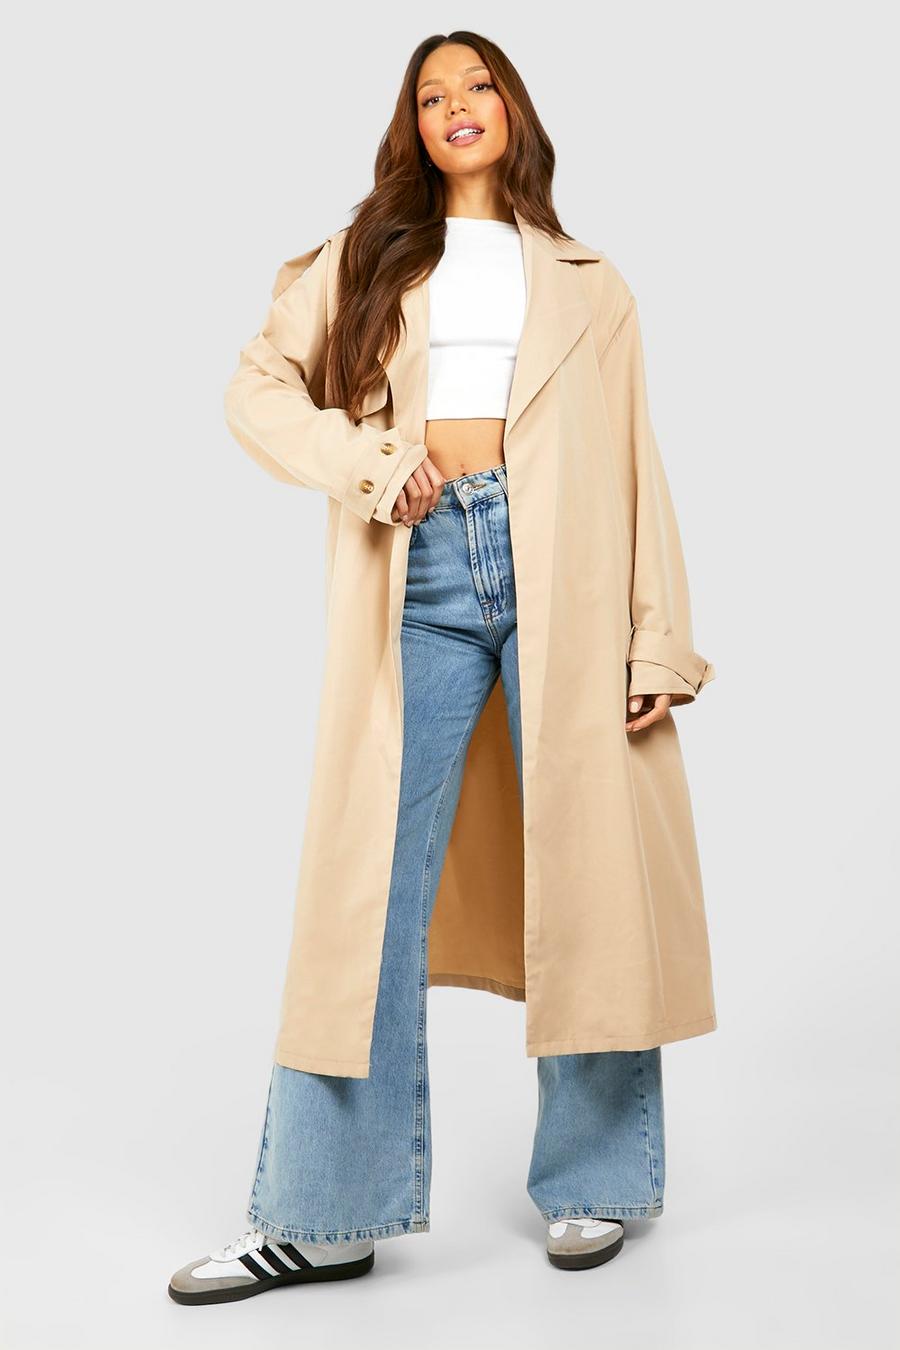 Stone Tall Woven Oversized Trench Coat